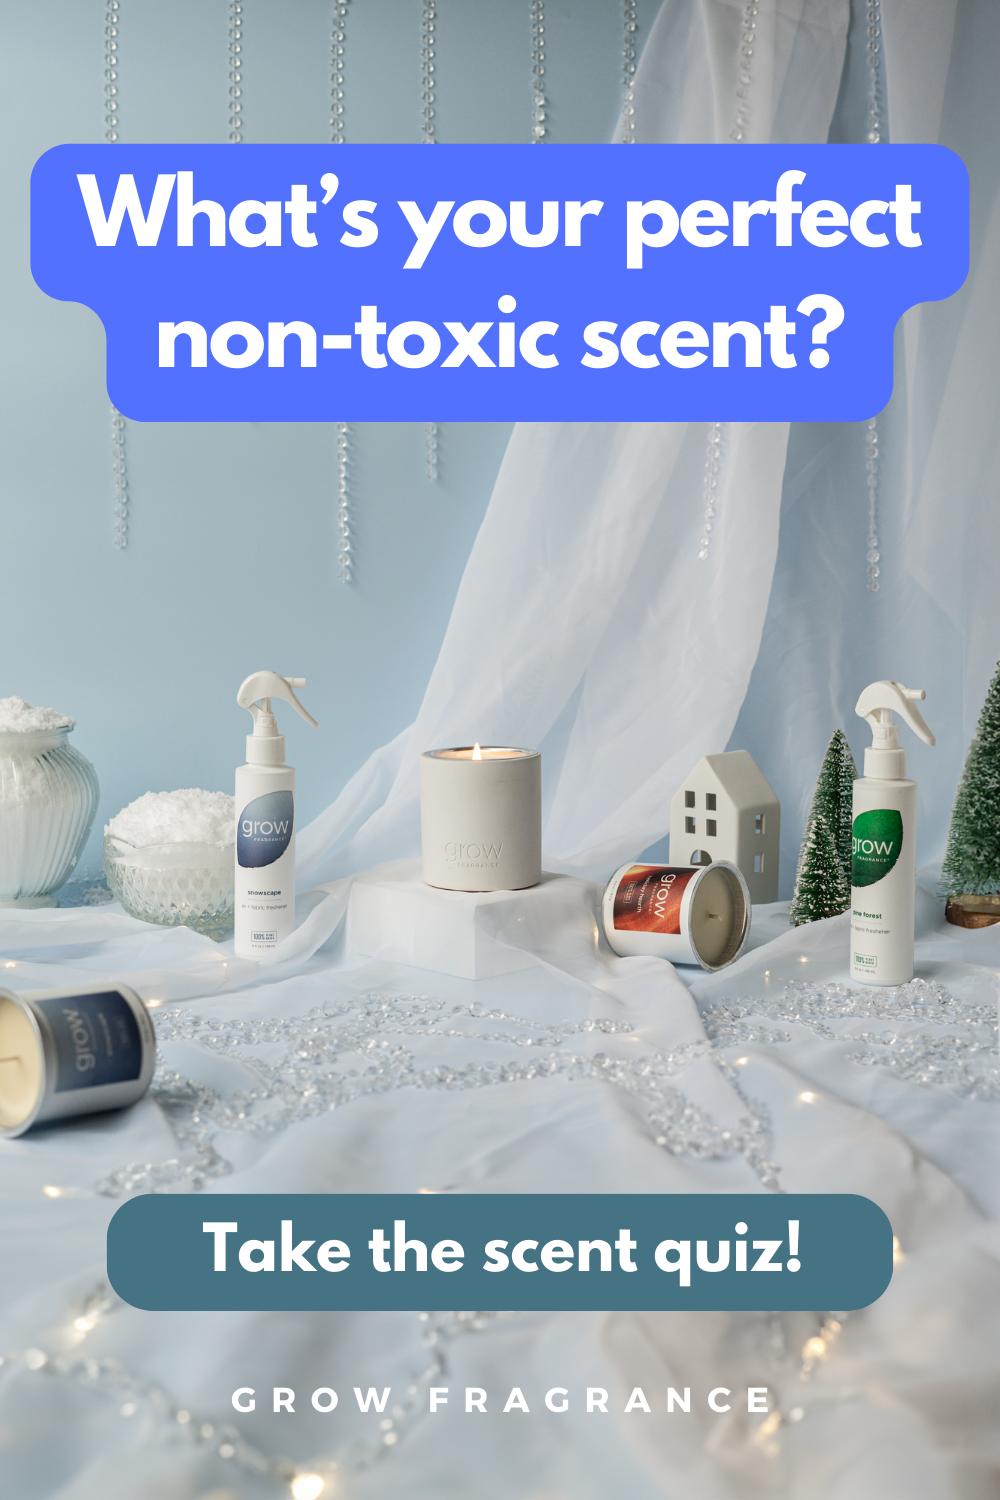 Explore Non-Toxic Winter Candles: Find Your Signature Fragrance among Holiday Hearth, Snowscape, and Palo Santo Pine – Take Our Quiz for Cozy Home Scent Ideas!"